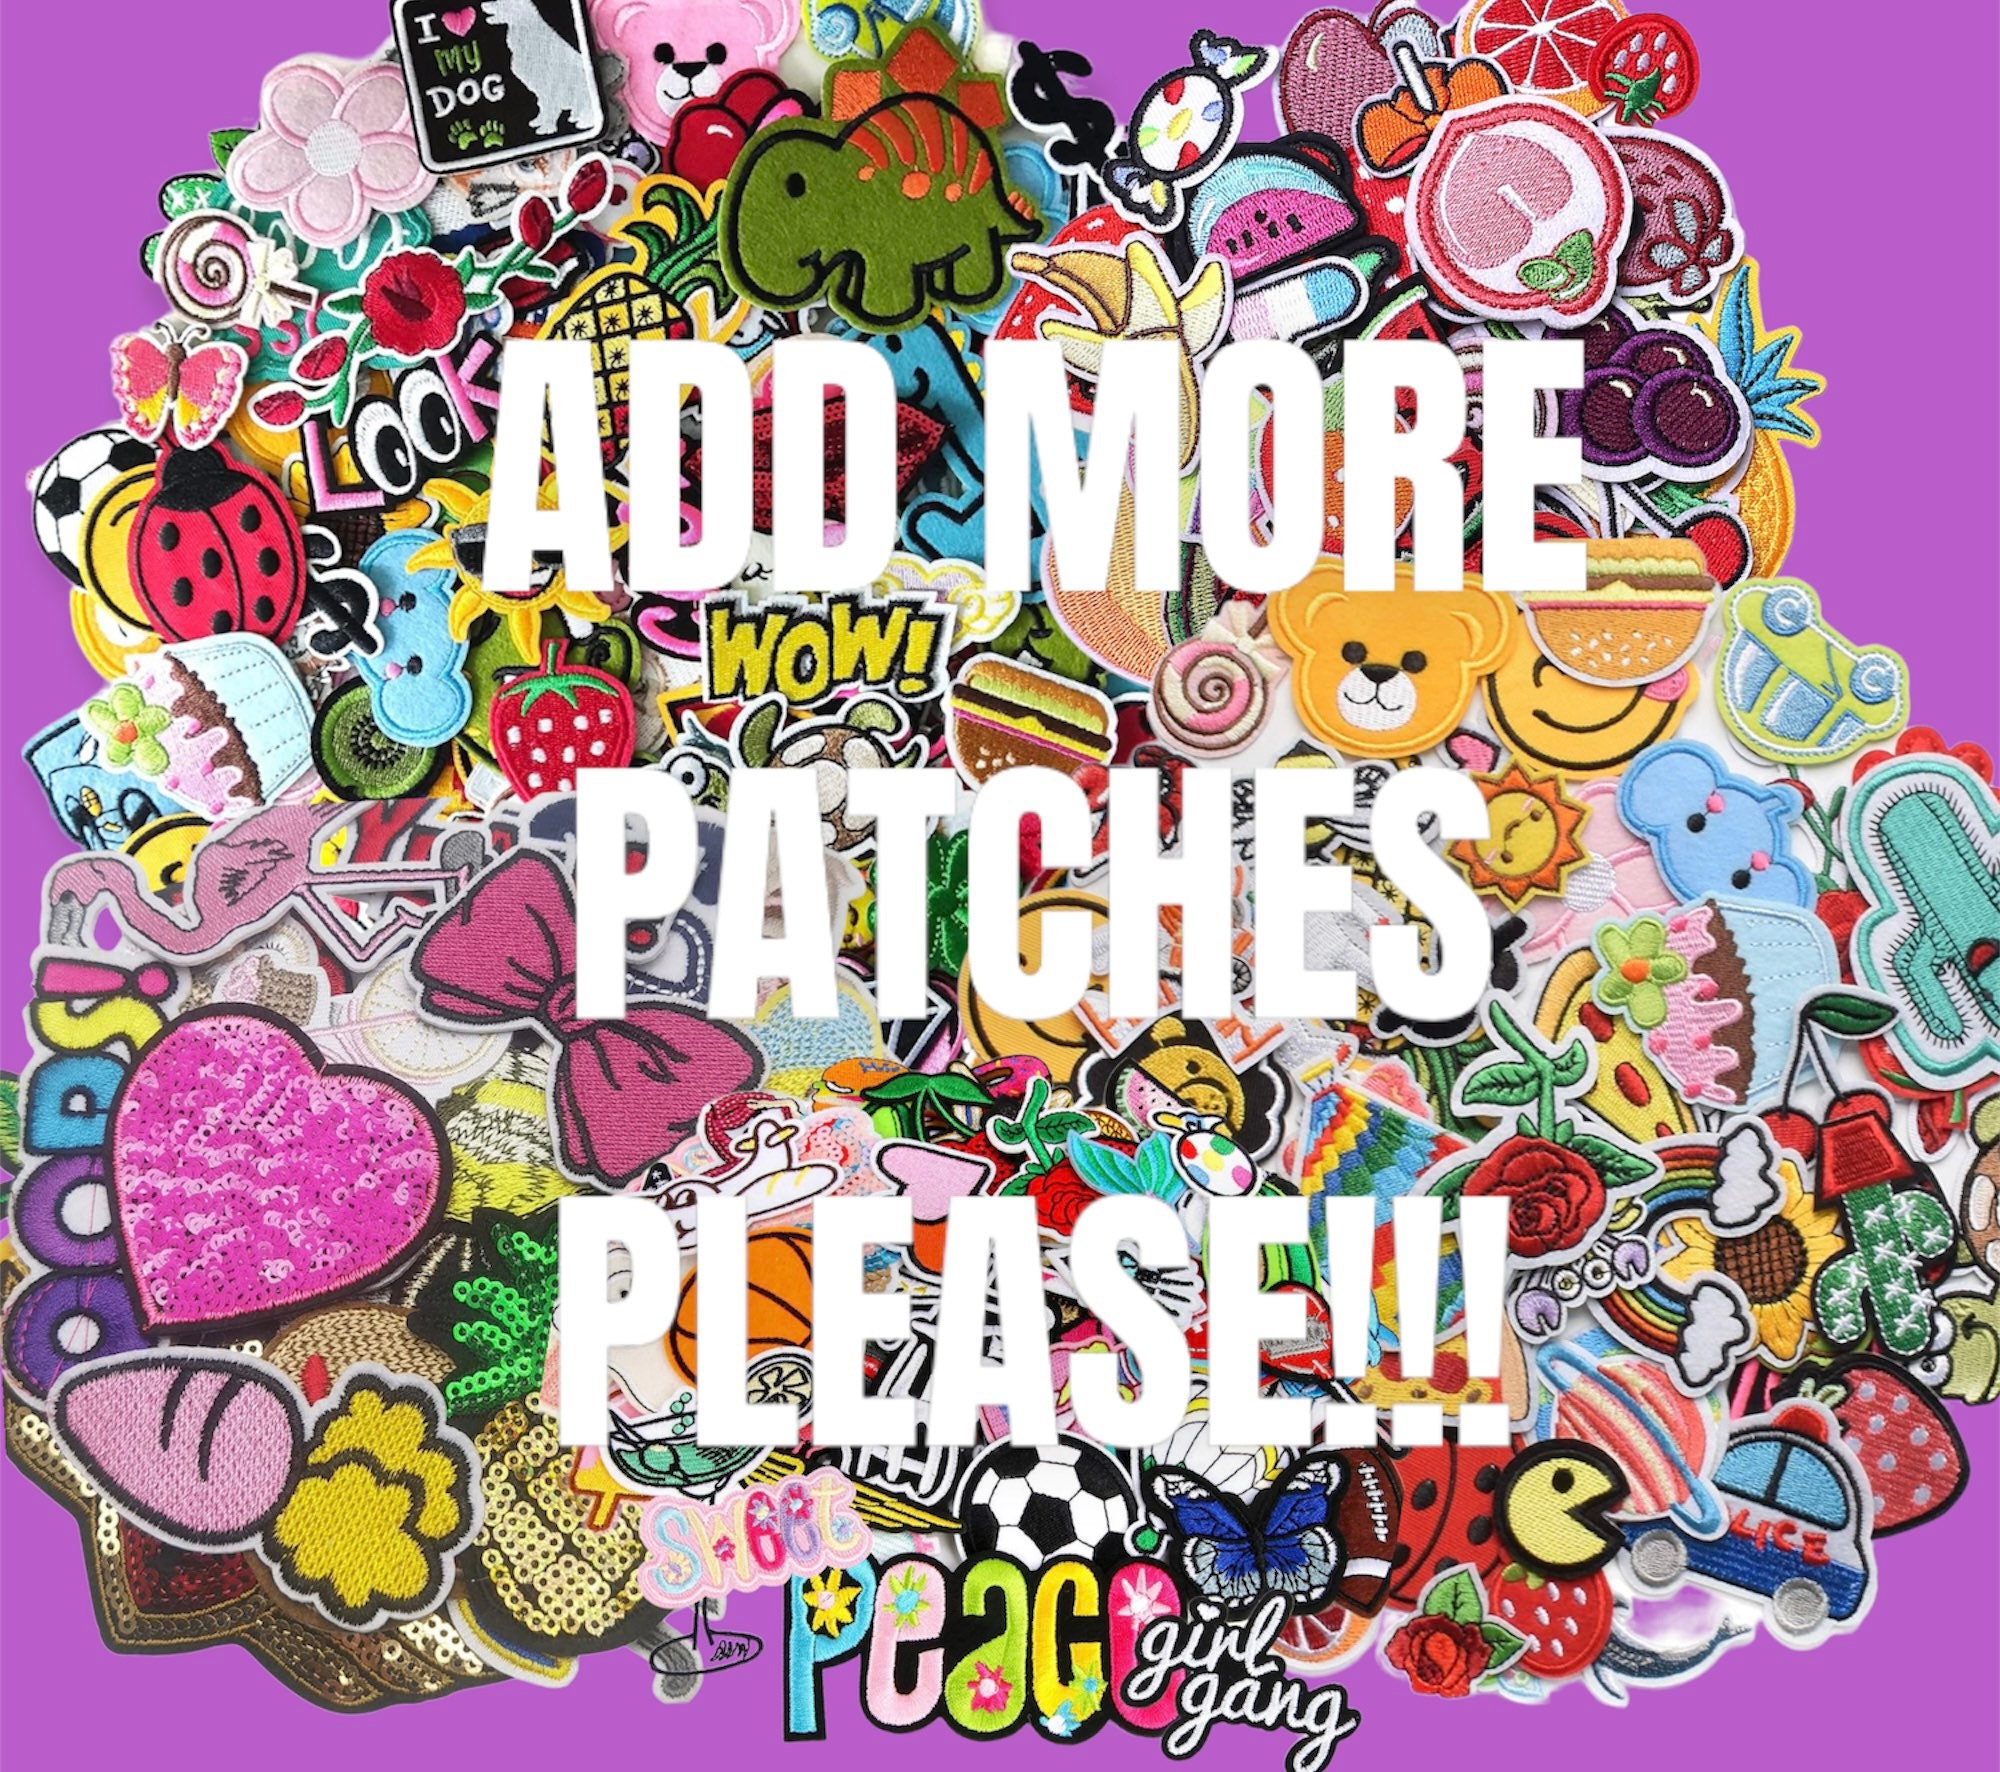 Embroidered Iron On Patches，A18 Pieces Bright Colors Cute Patches, Sew On  or Iron On Patches Applique for Clothing Jeans Jackets Pants Dress Shoes